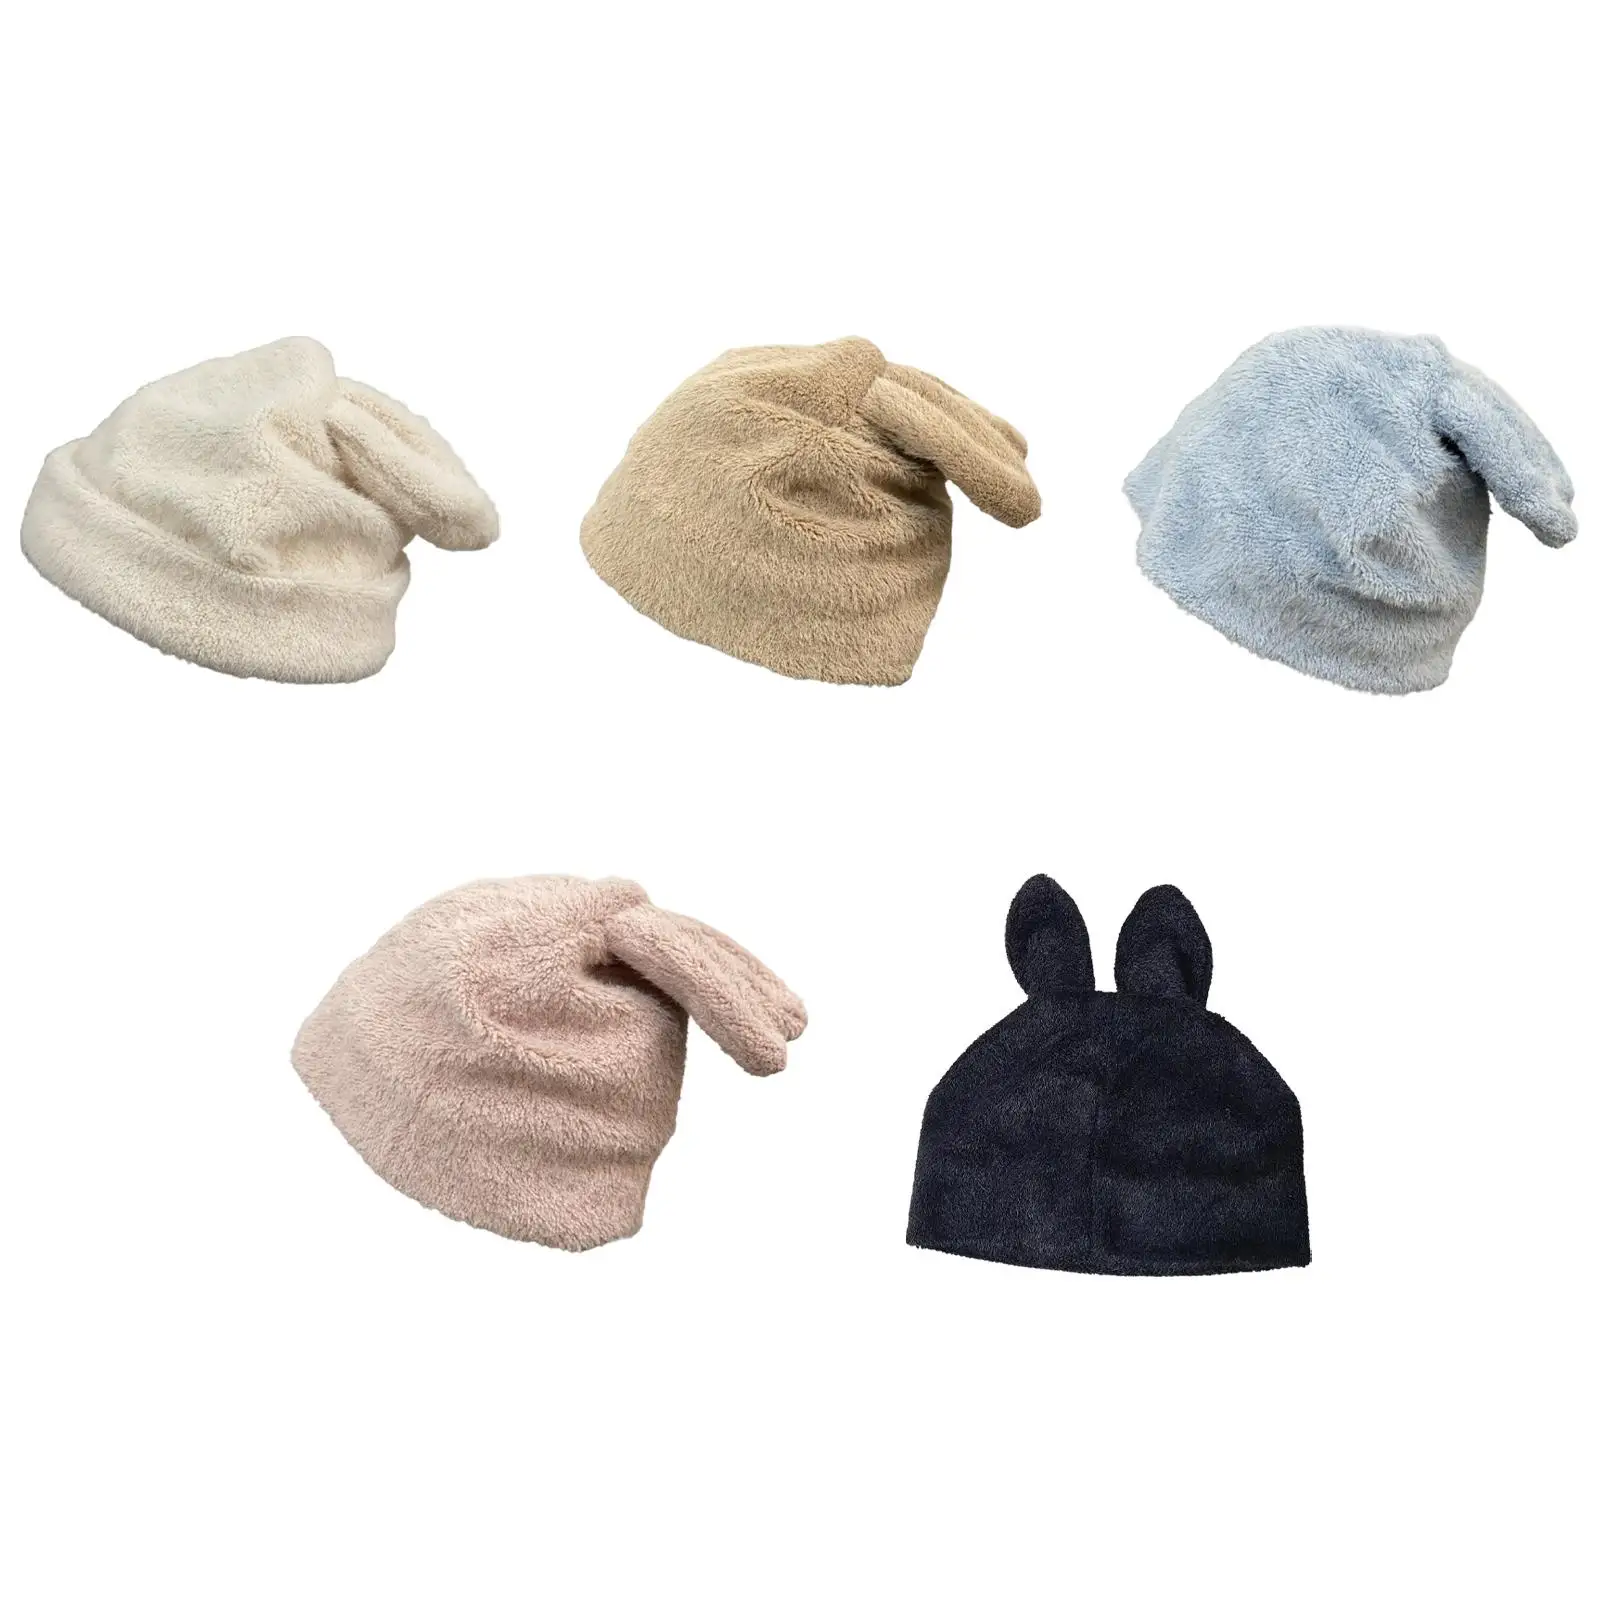 Stylish Rabbit Ears Beanie Hats Knitted Hat Headgear Soft Winter Warm Hat for Party Favors Outdoor Activities Camping Ski